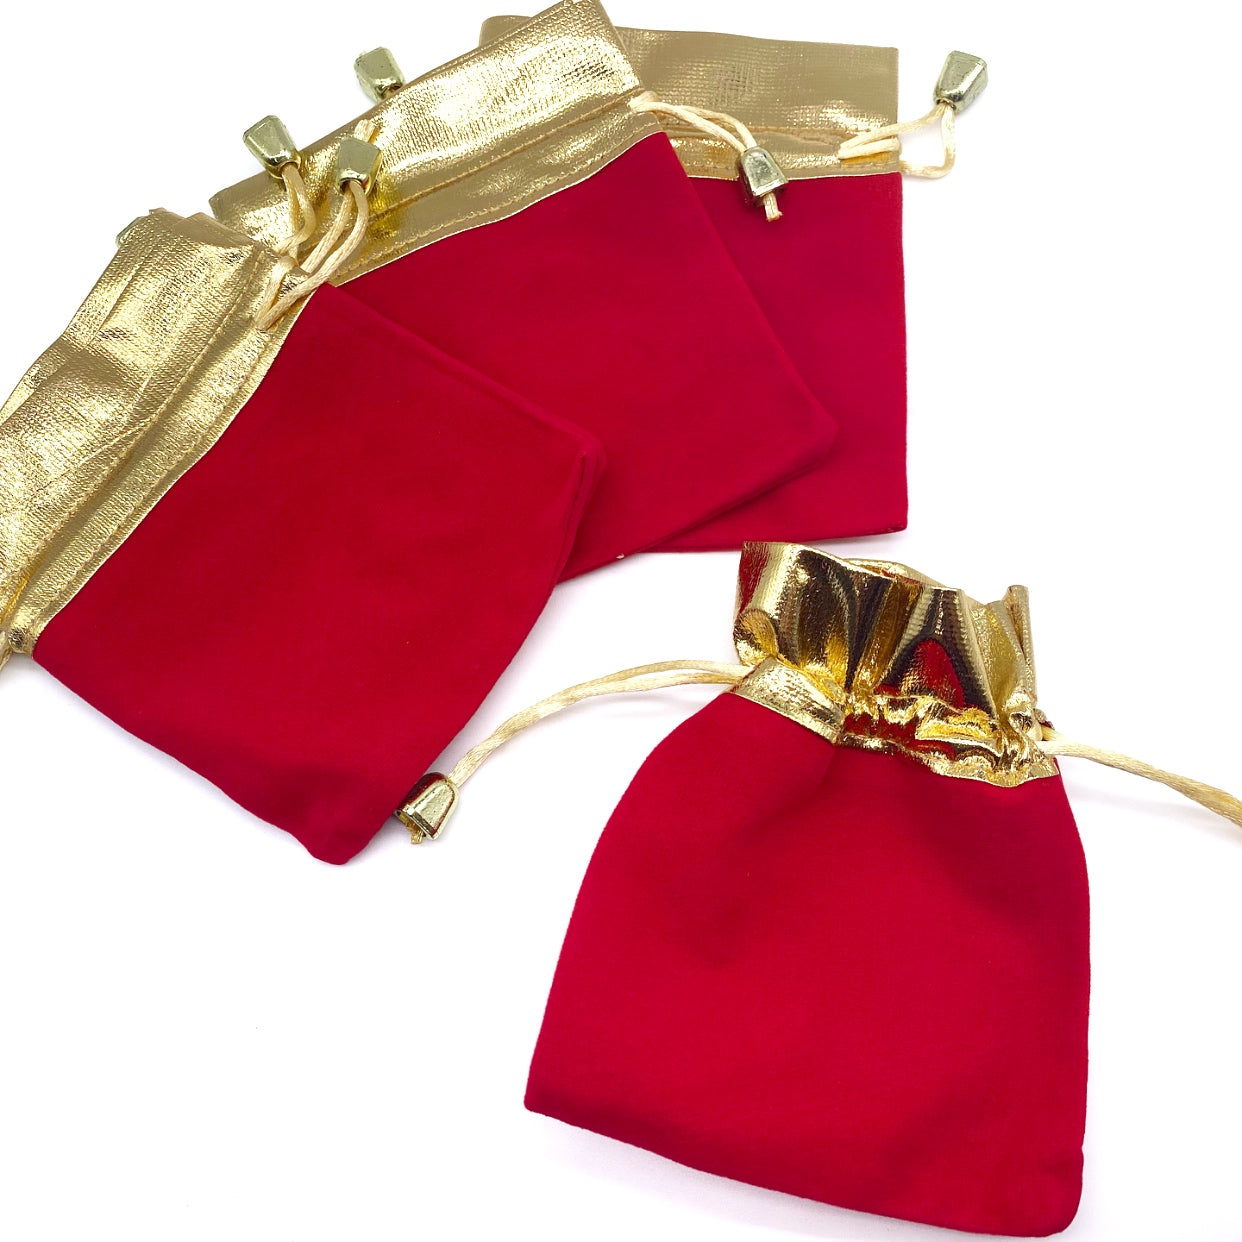 Luxury Special Edition Gold & Red Velvet Drawstring Gift Bag/Pouch